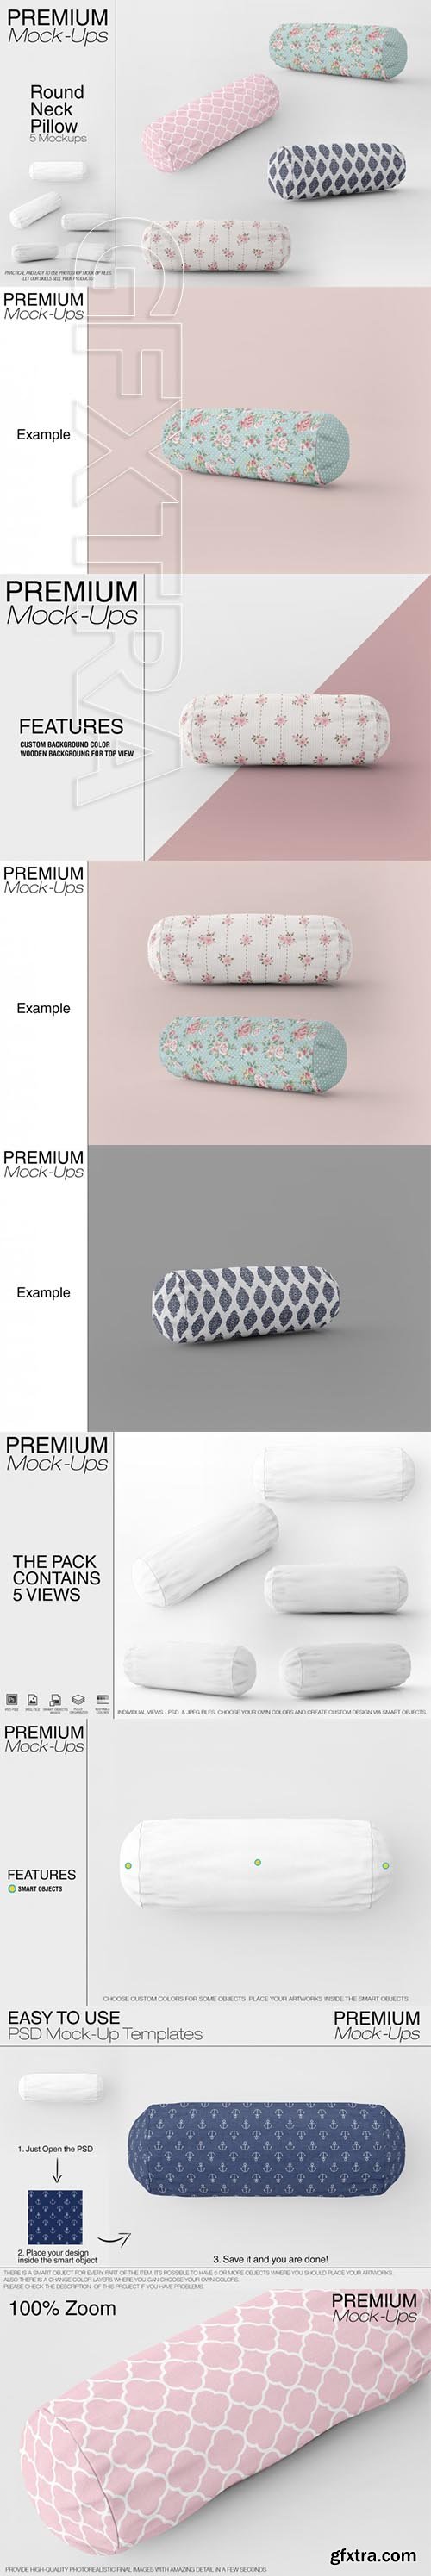 Round Neck Pillow Mockup Pack